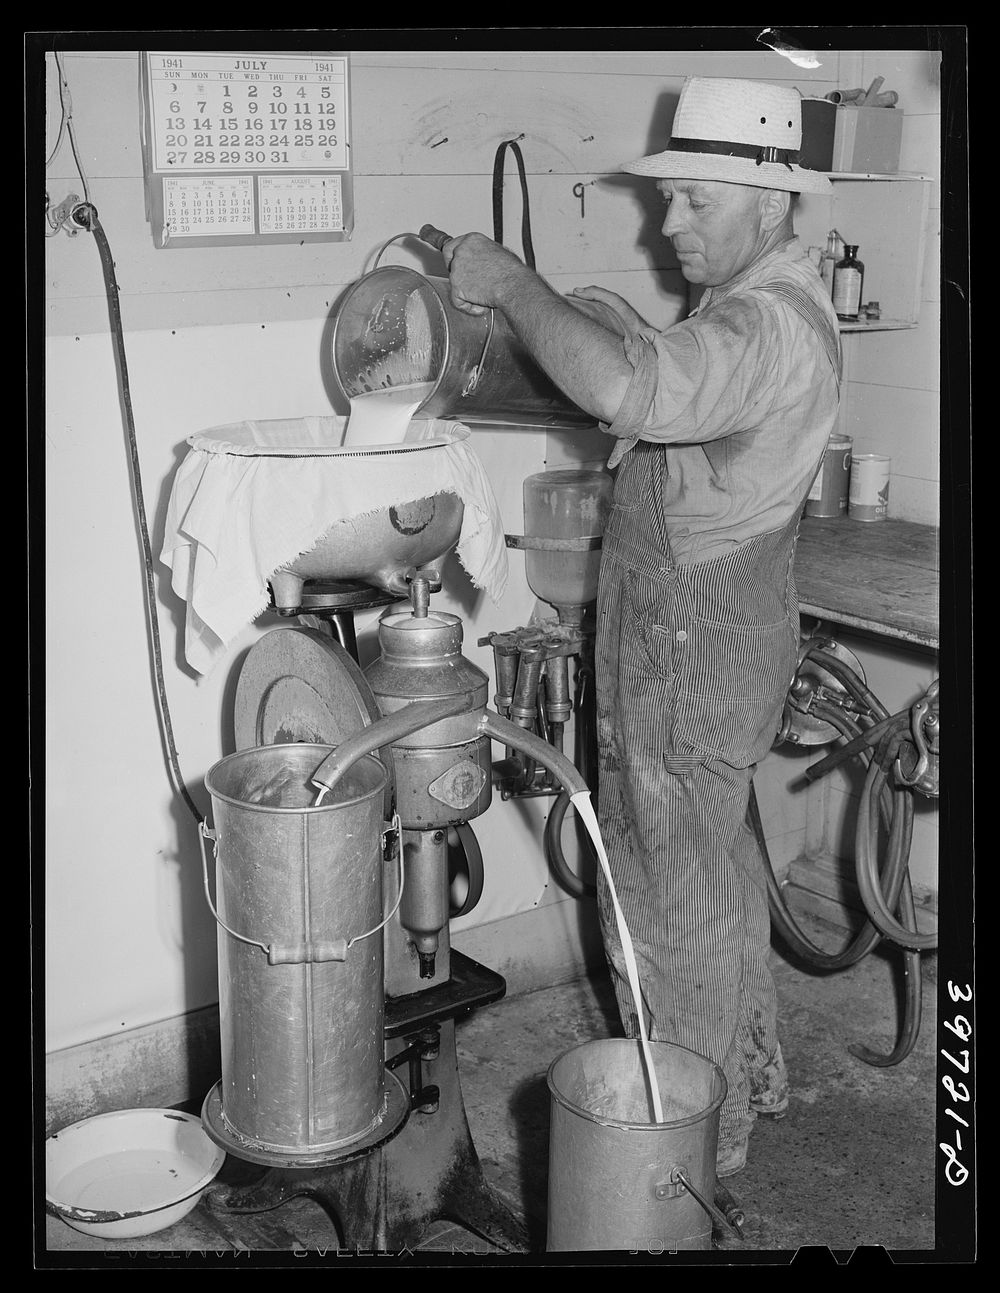 Member of the Dairymen's Cooperative Creamery uses cream separator on his farm. Caldwell, Canyon County, Idaho by Russell Lee